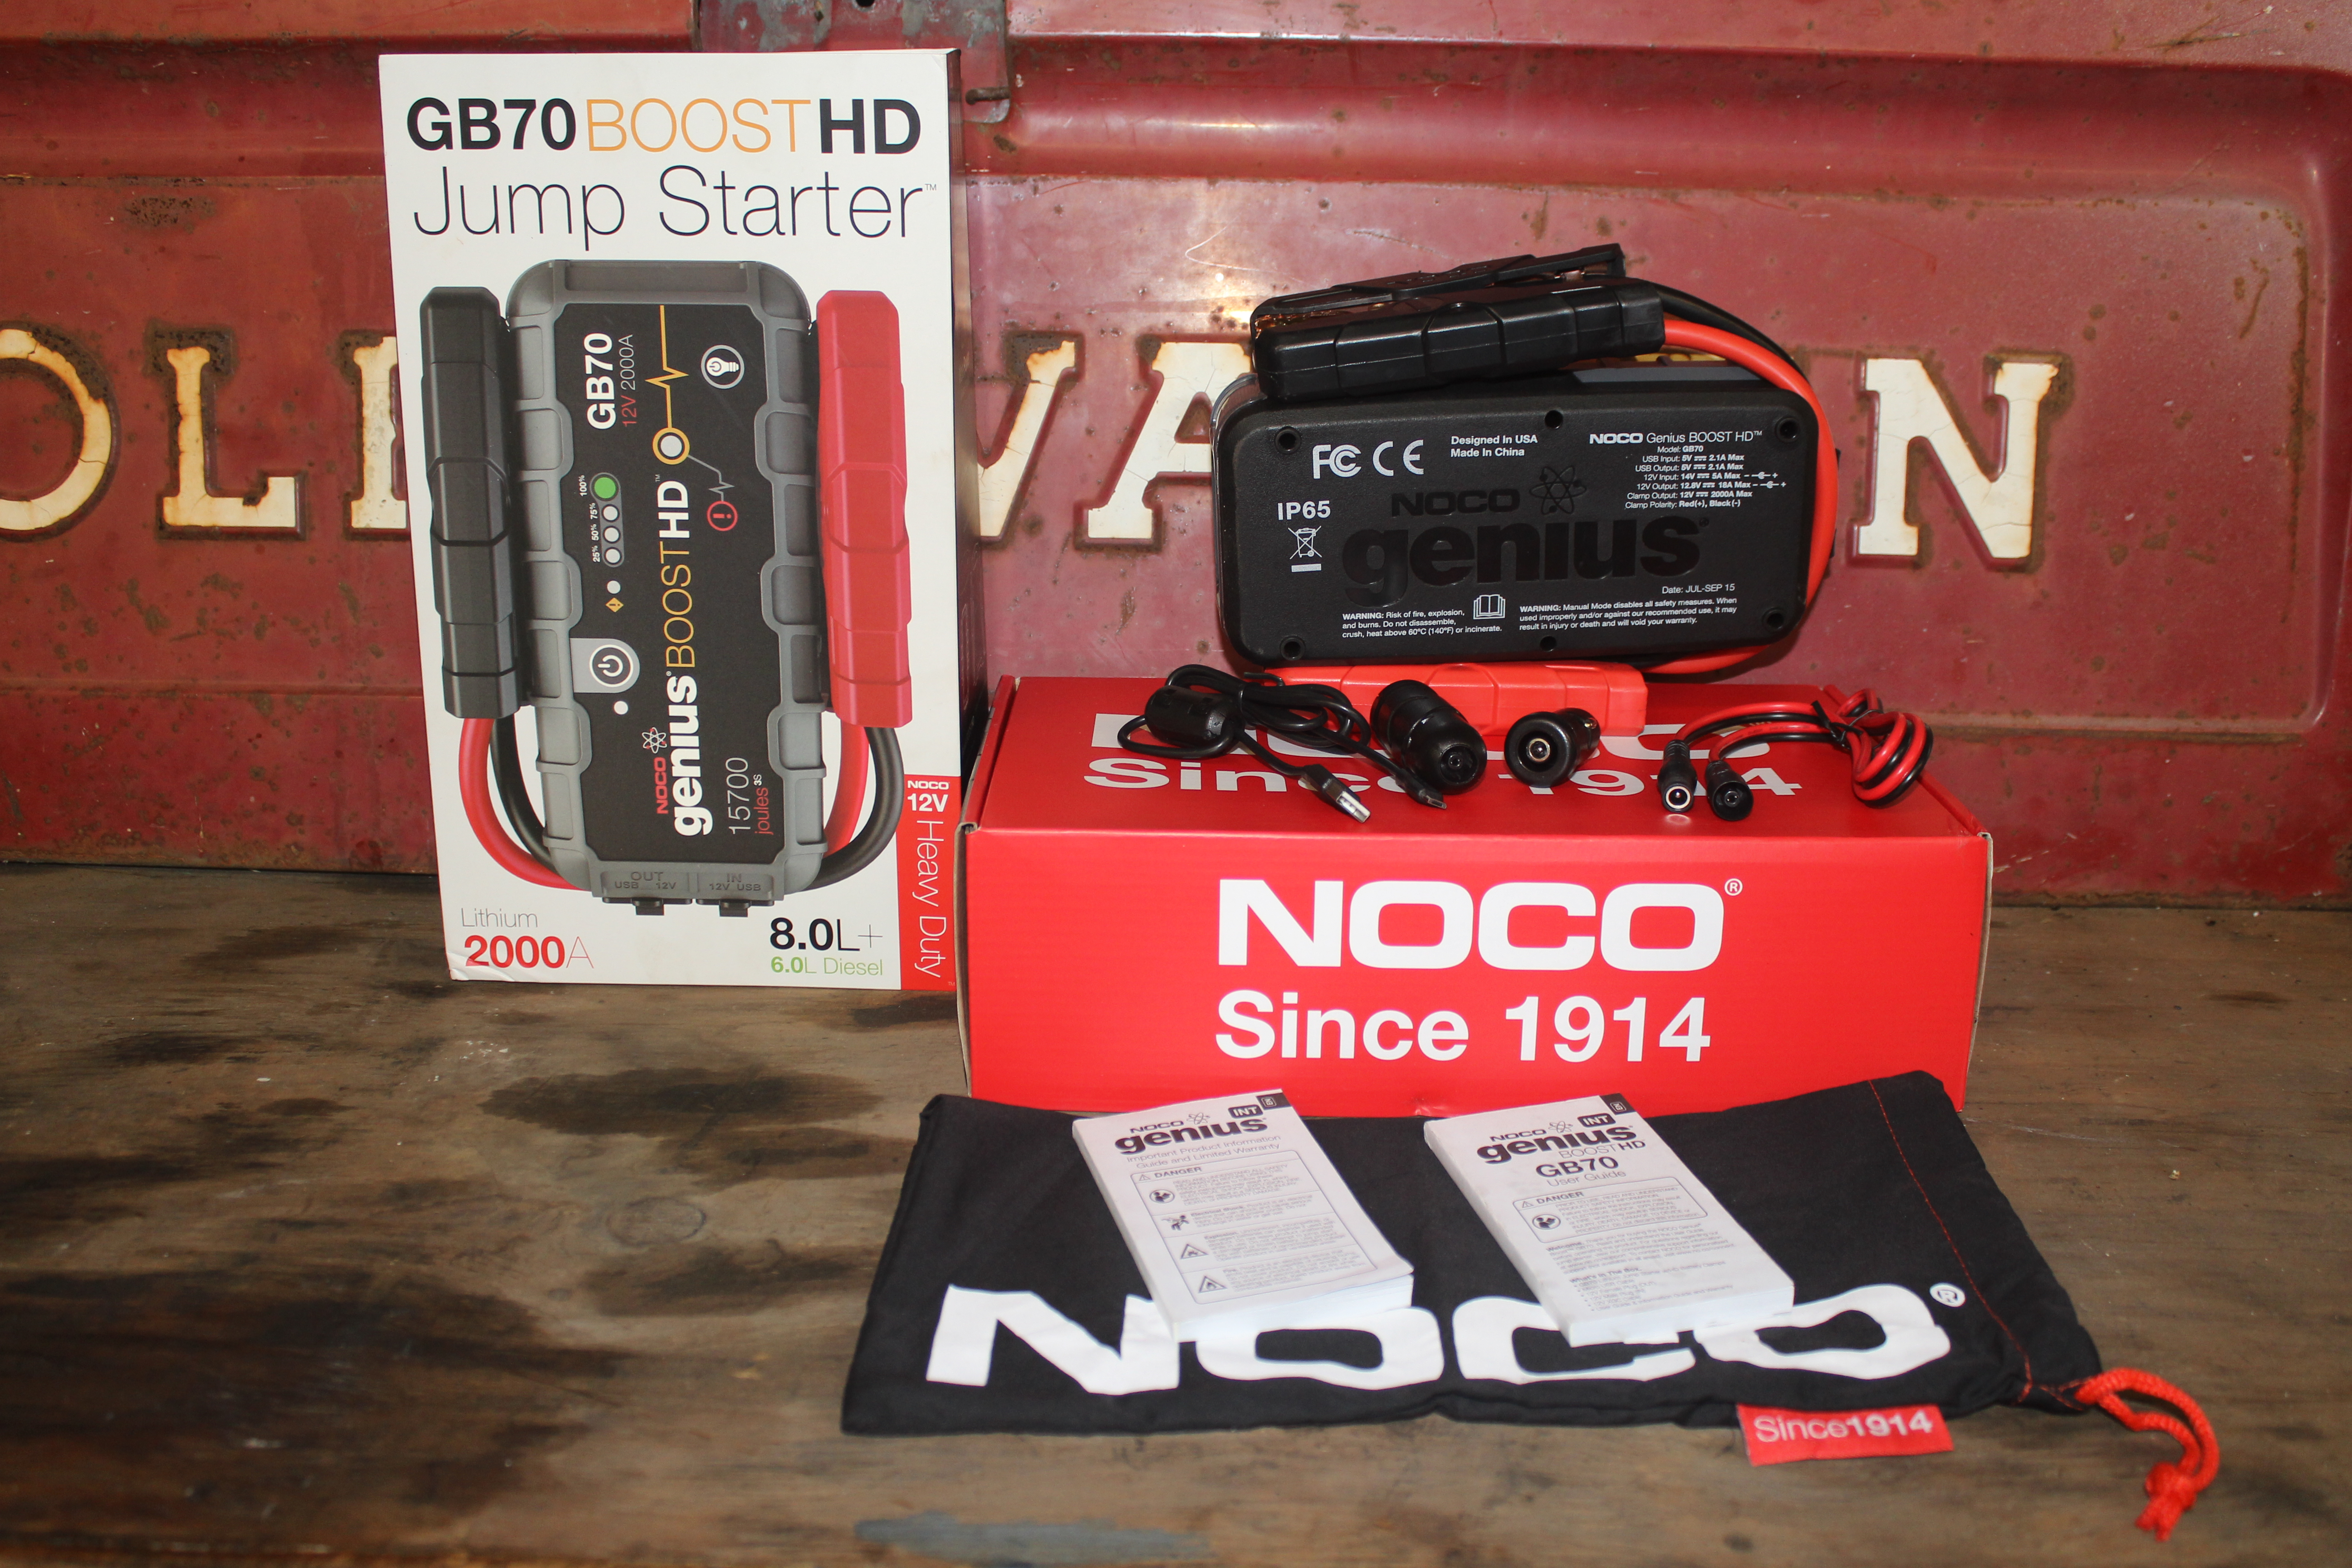 NOCO GB70 Review: The Portable Jump Starter Meant for Big Engines